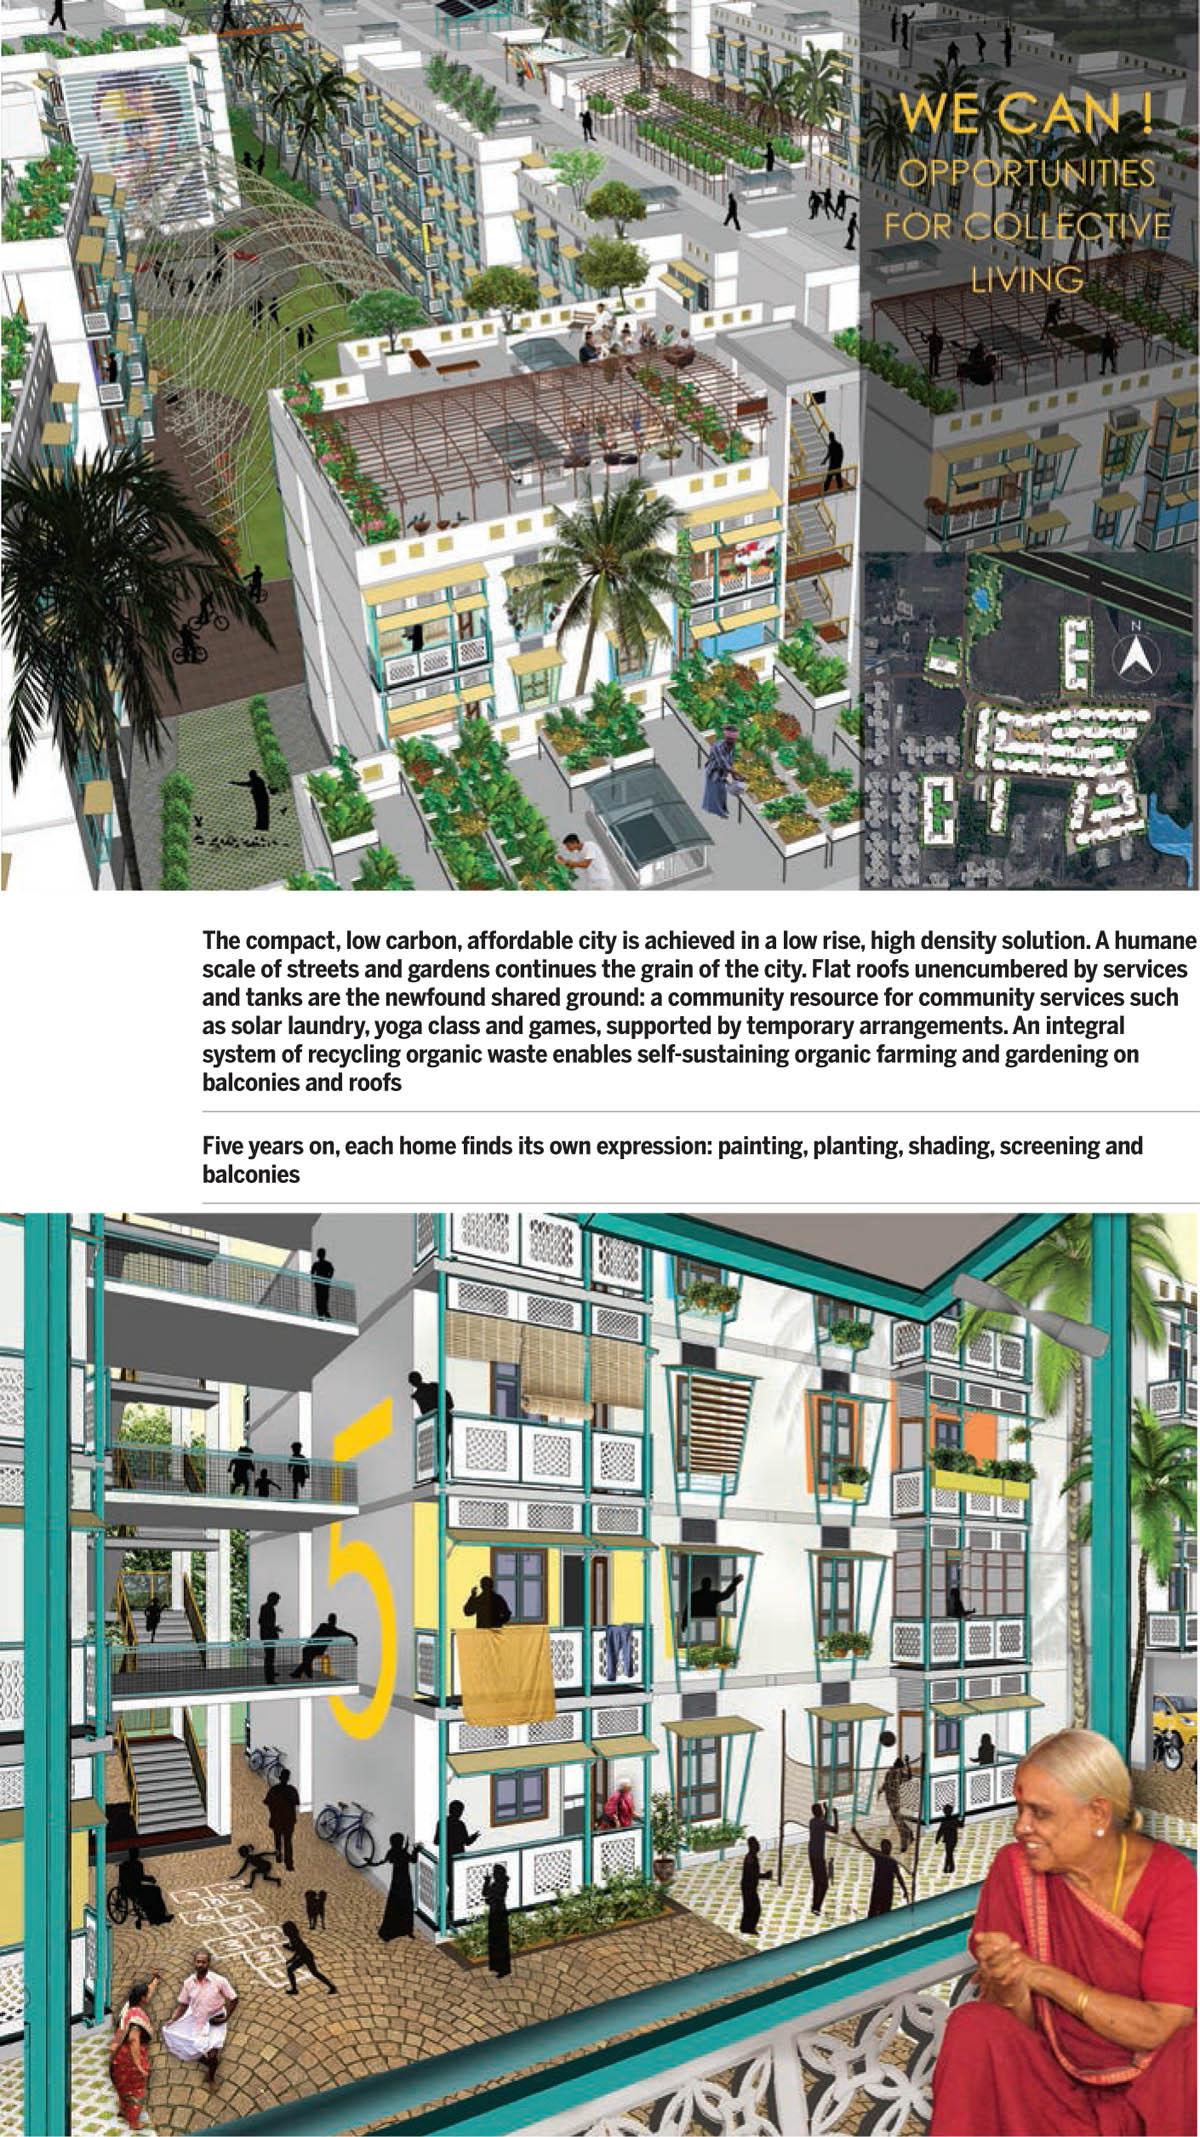 Principles-Affordable-Homes-Cities-compact-low-carbon-city-achieved-low-rise-high-density-solution-streets-gardens